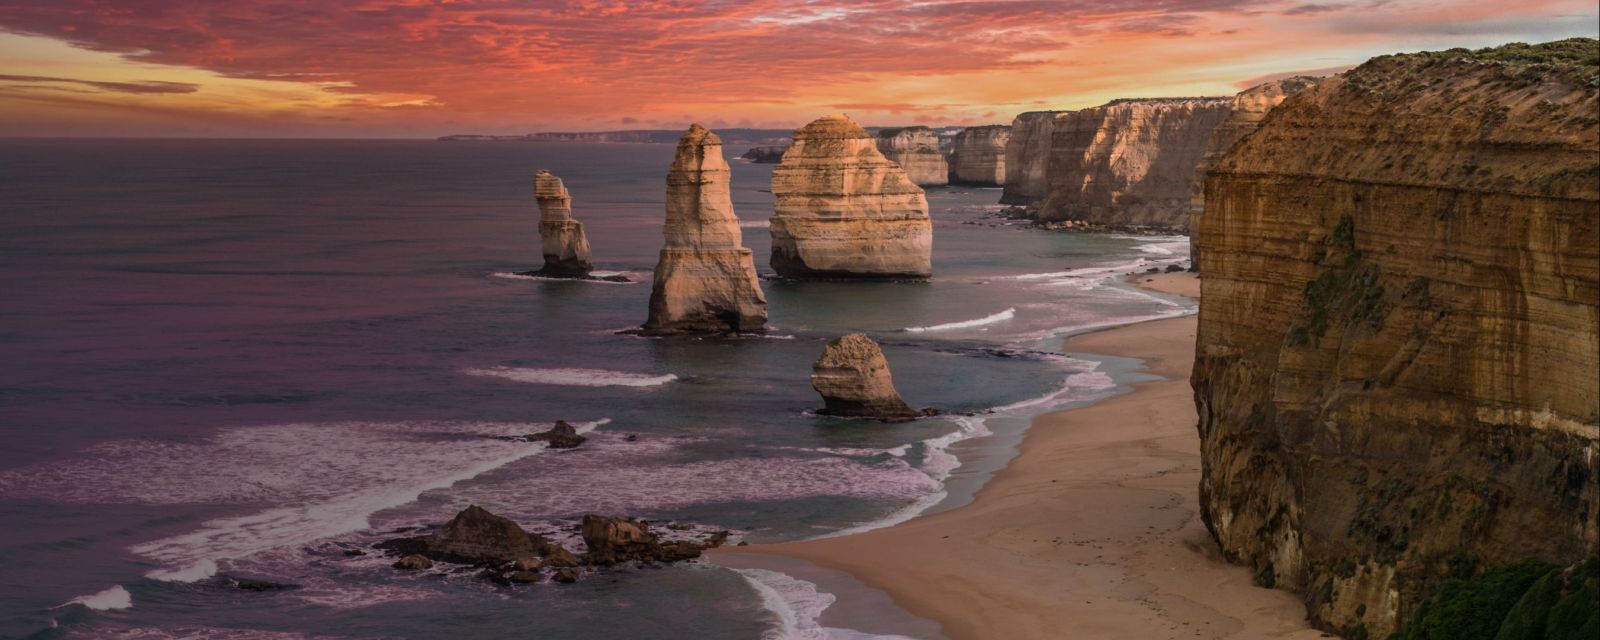 View to the 12 Apostles from the lookout at sunset